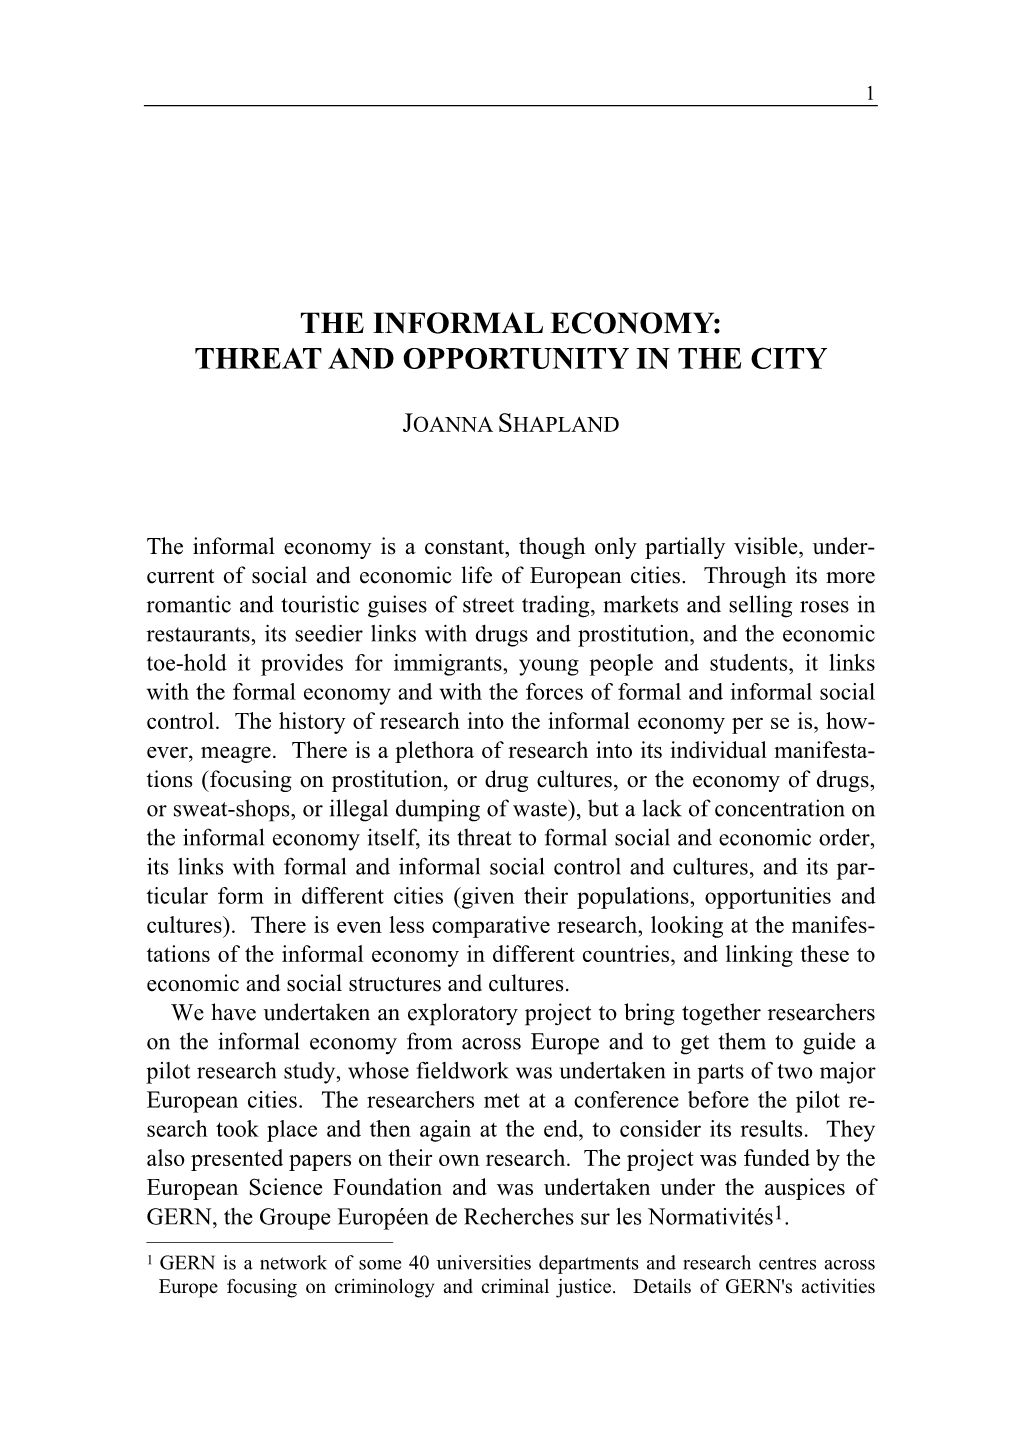 The Informal Economy: Threat and Opportunity in the City